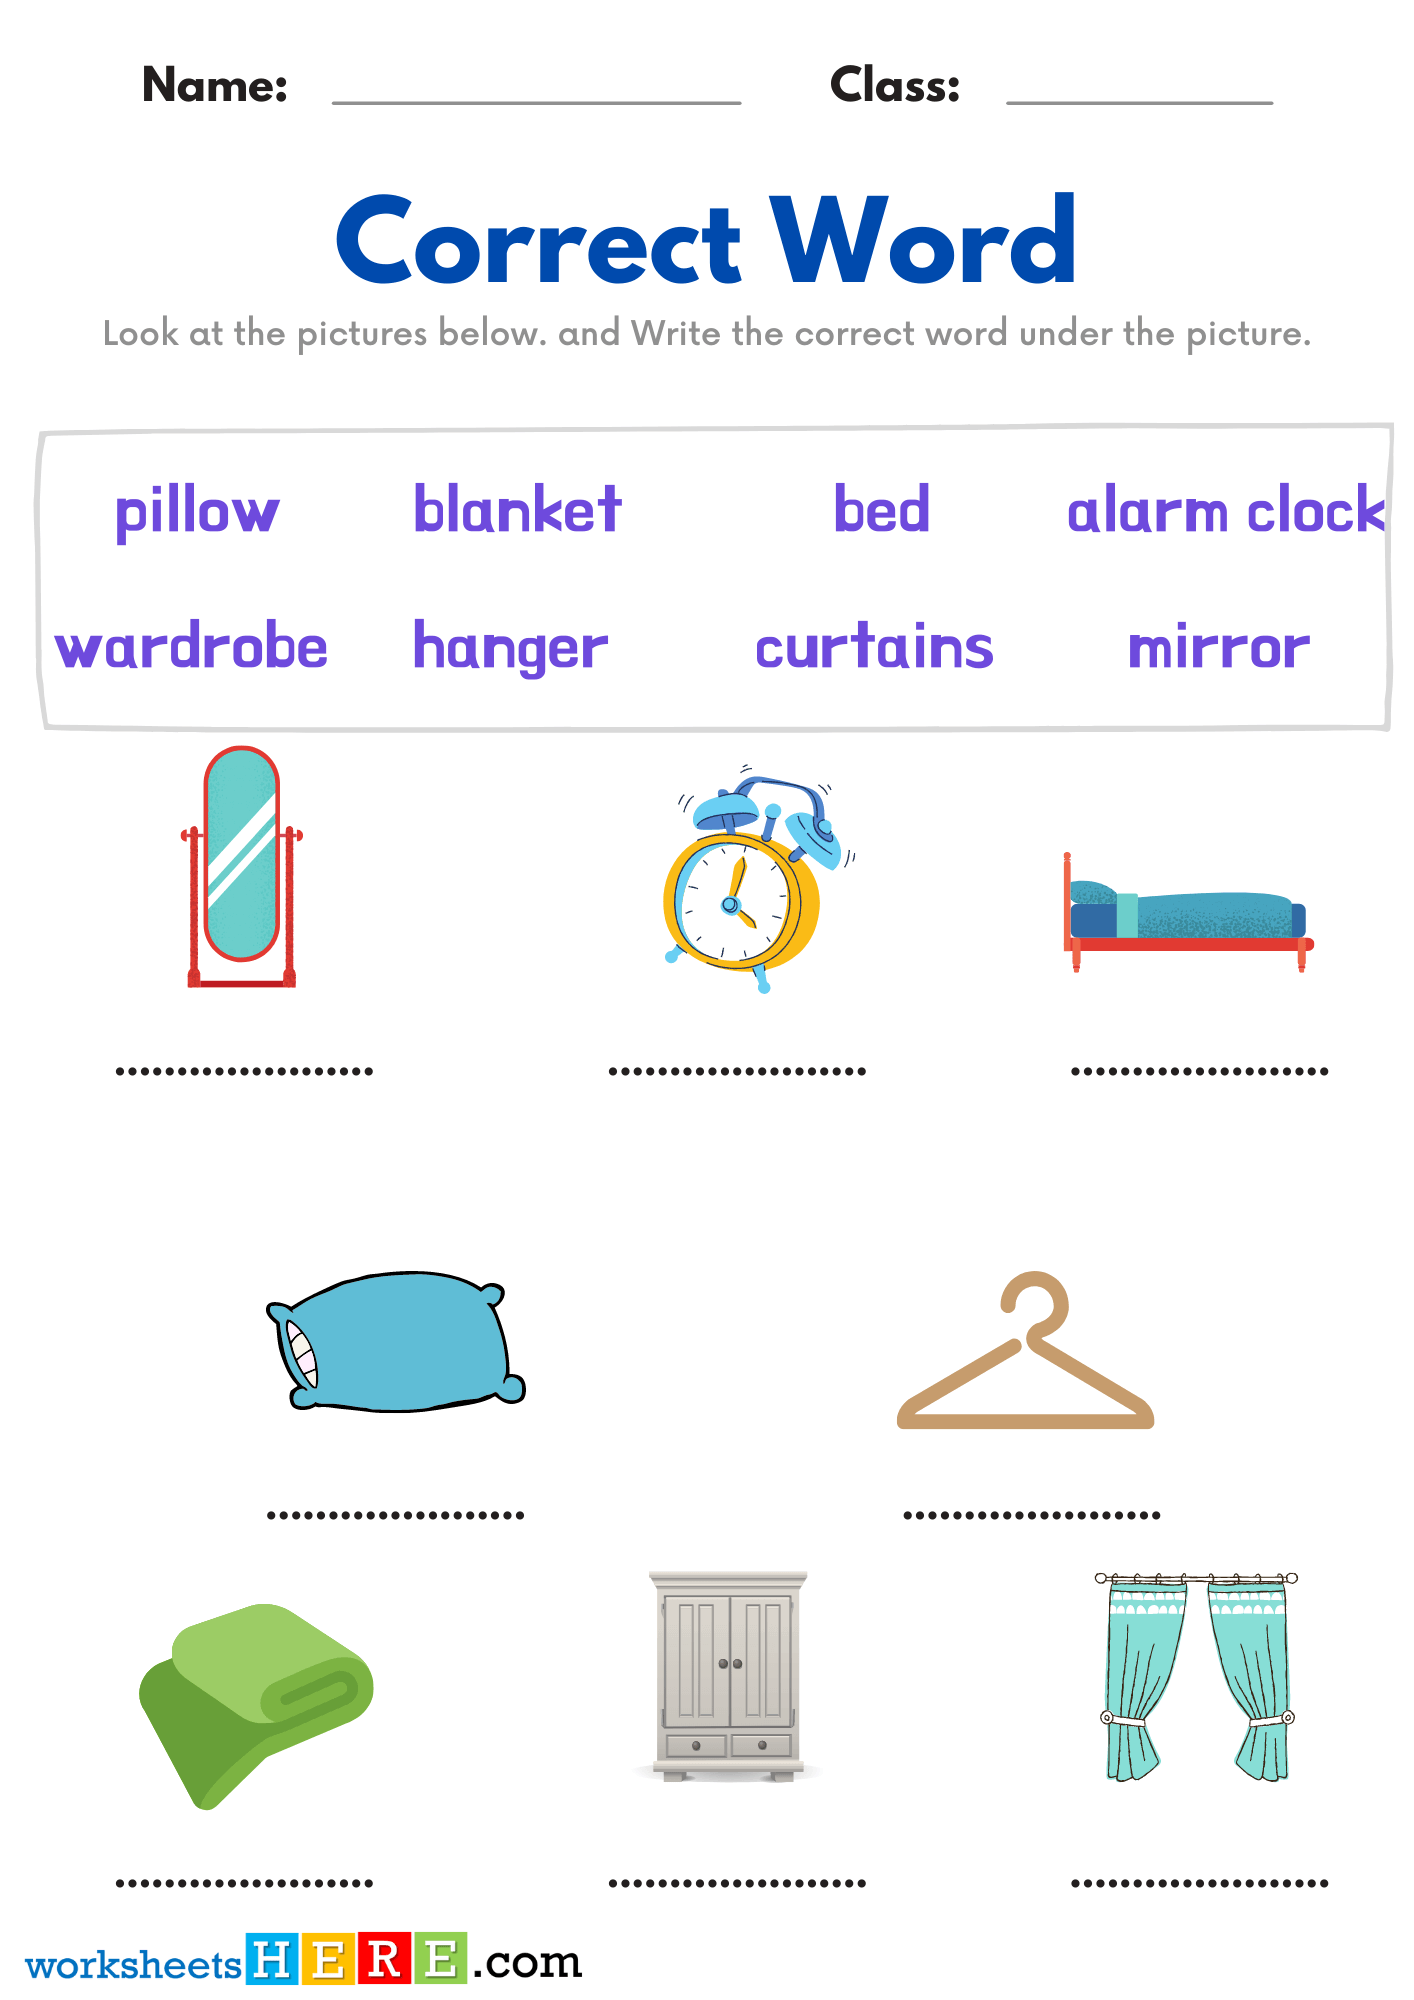 Matching Correct Words With Bedroom Objects Pictures PDF Worksheets For Kindergarten